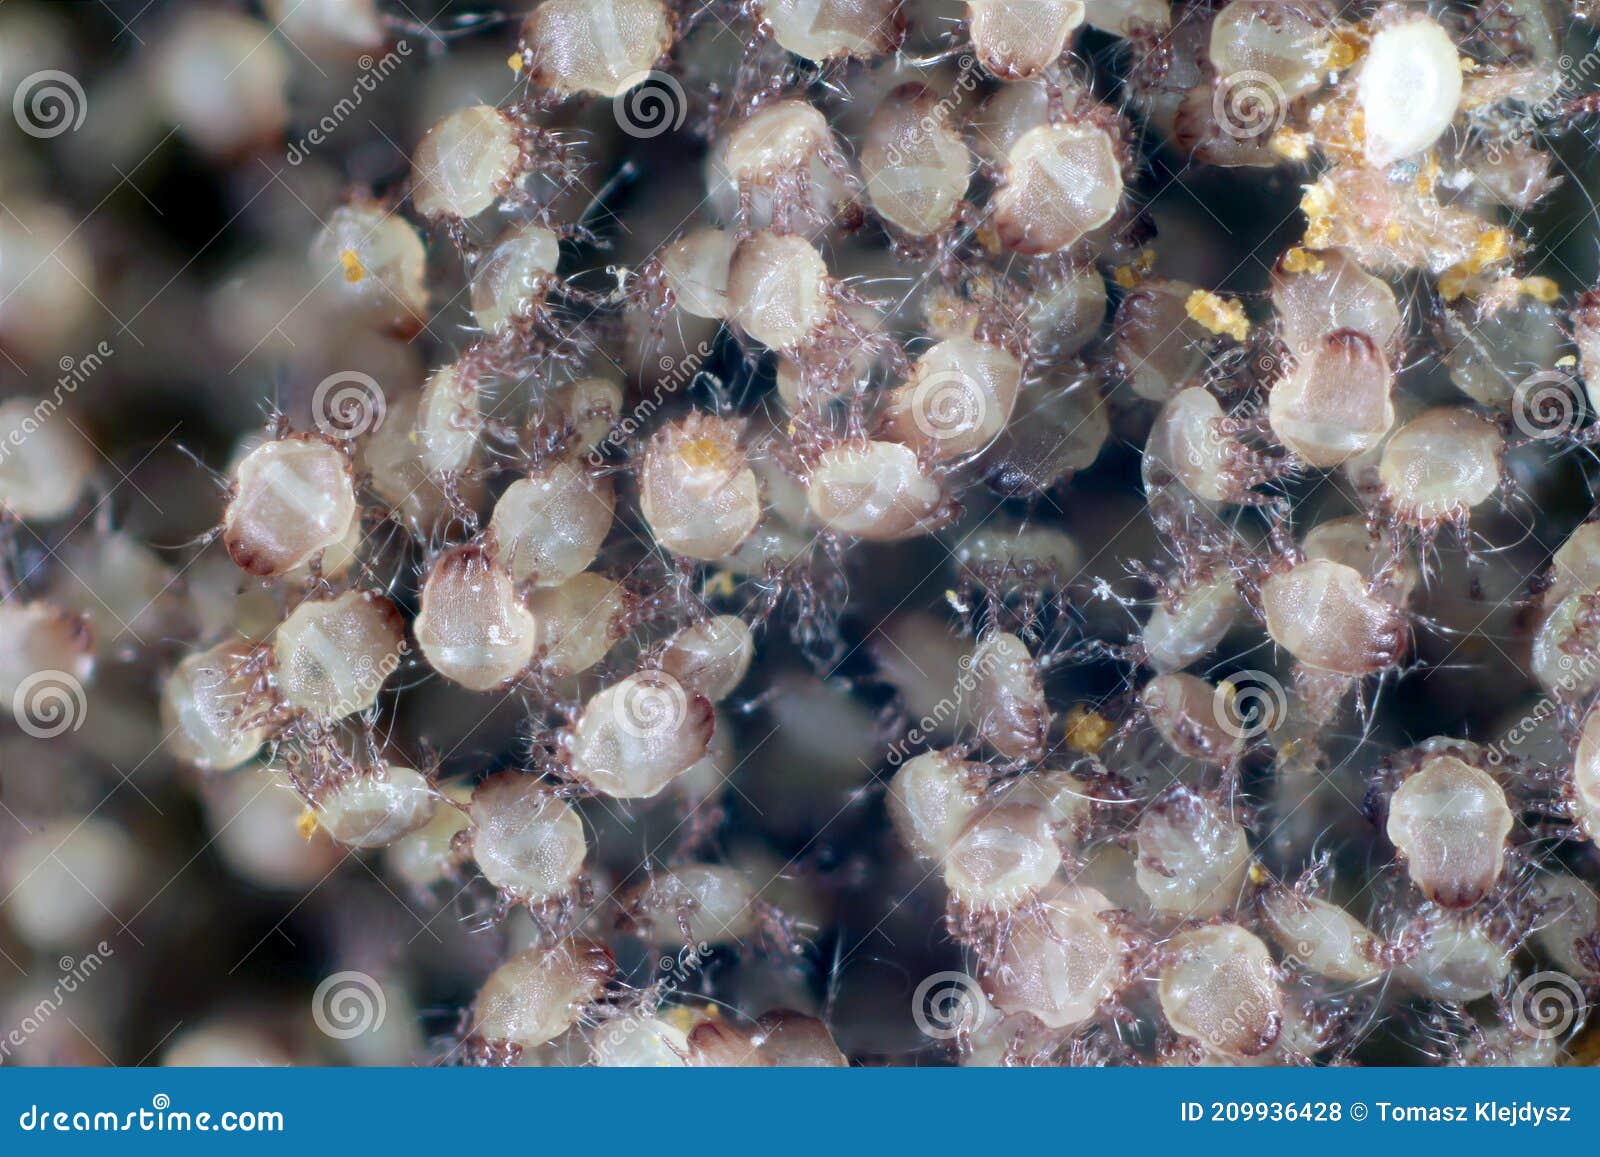 a magnification of a lot of dust mites